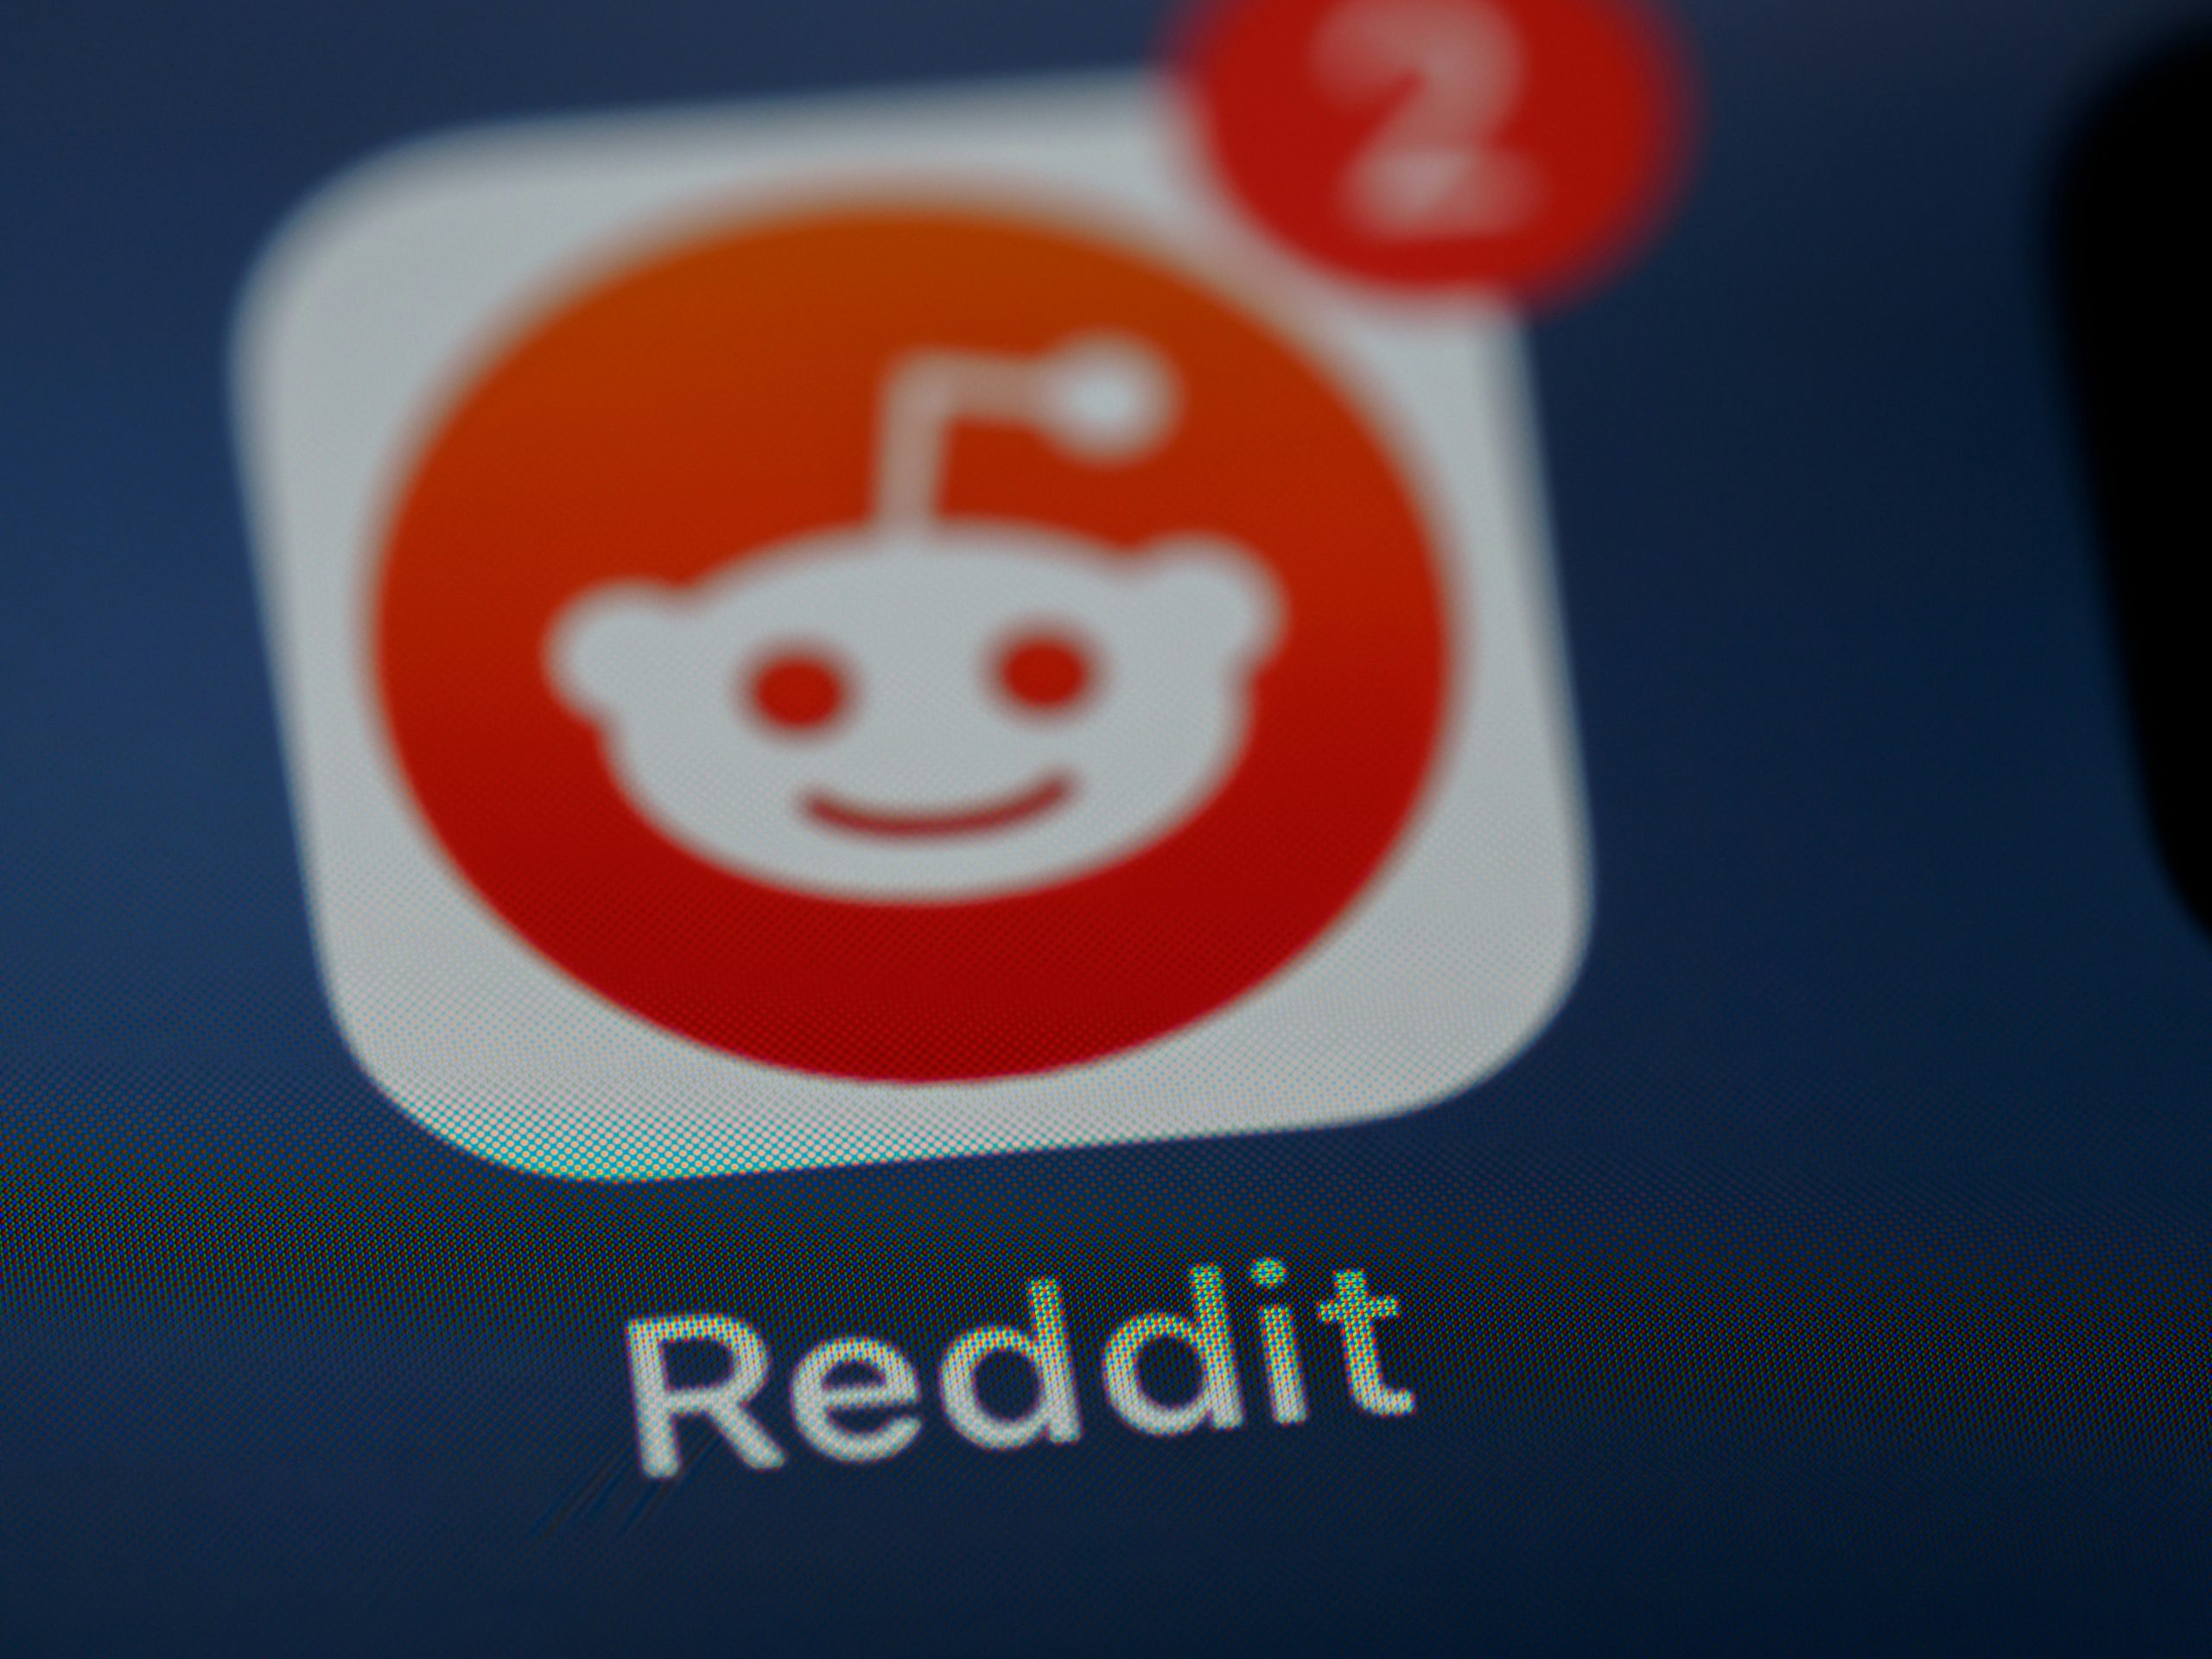 Is Reddit Going Public and Inviting Investment from Key Users the Beginning of the End?